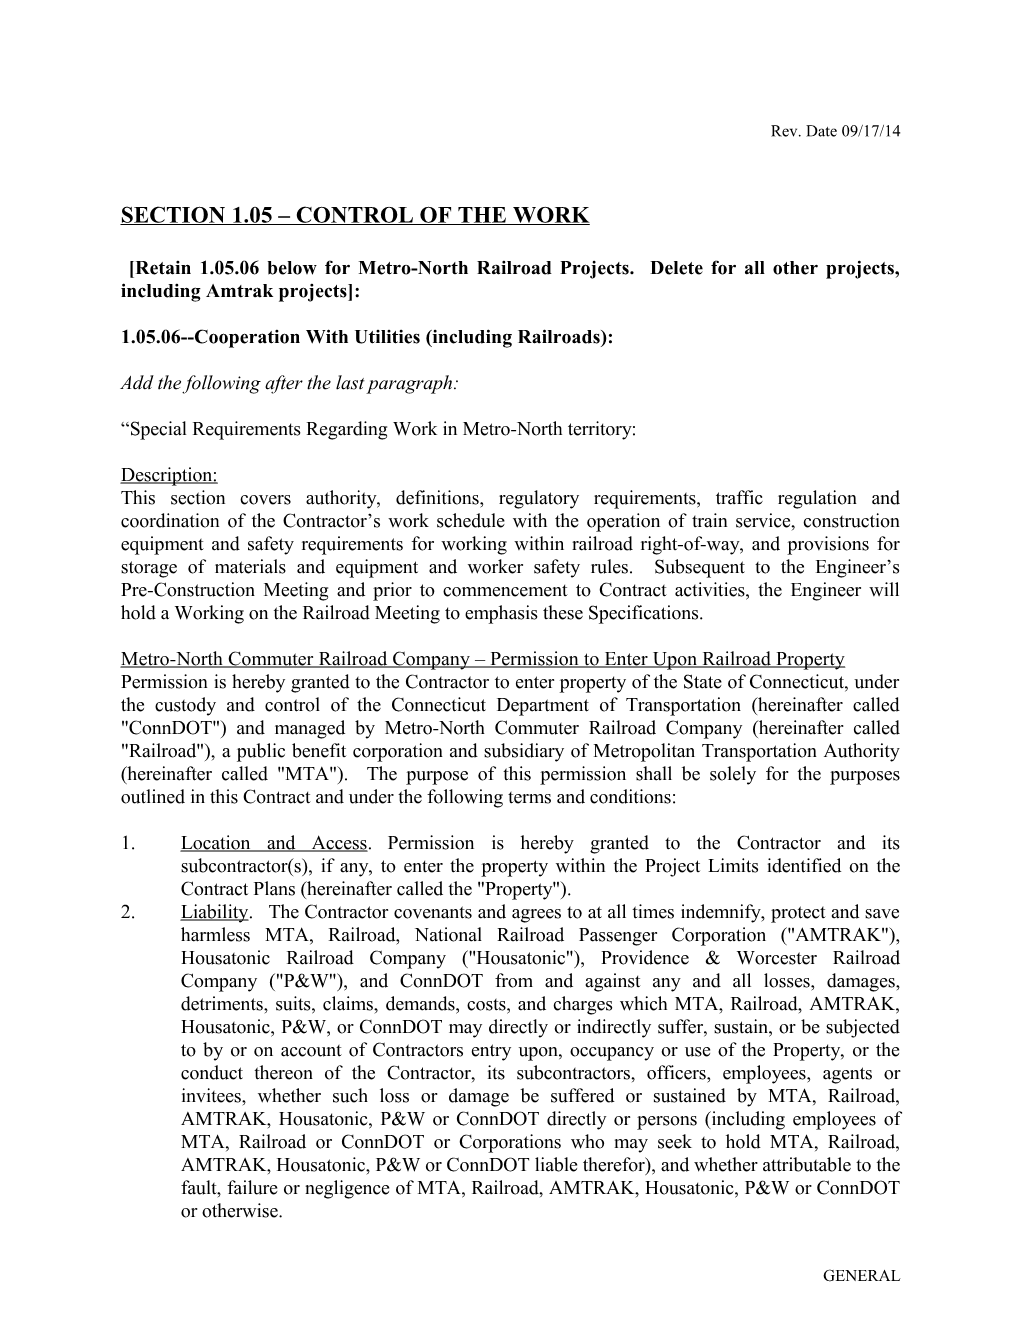 Section 1.05 CONTROL of the WORK